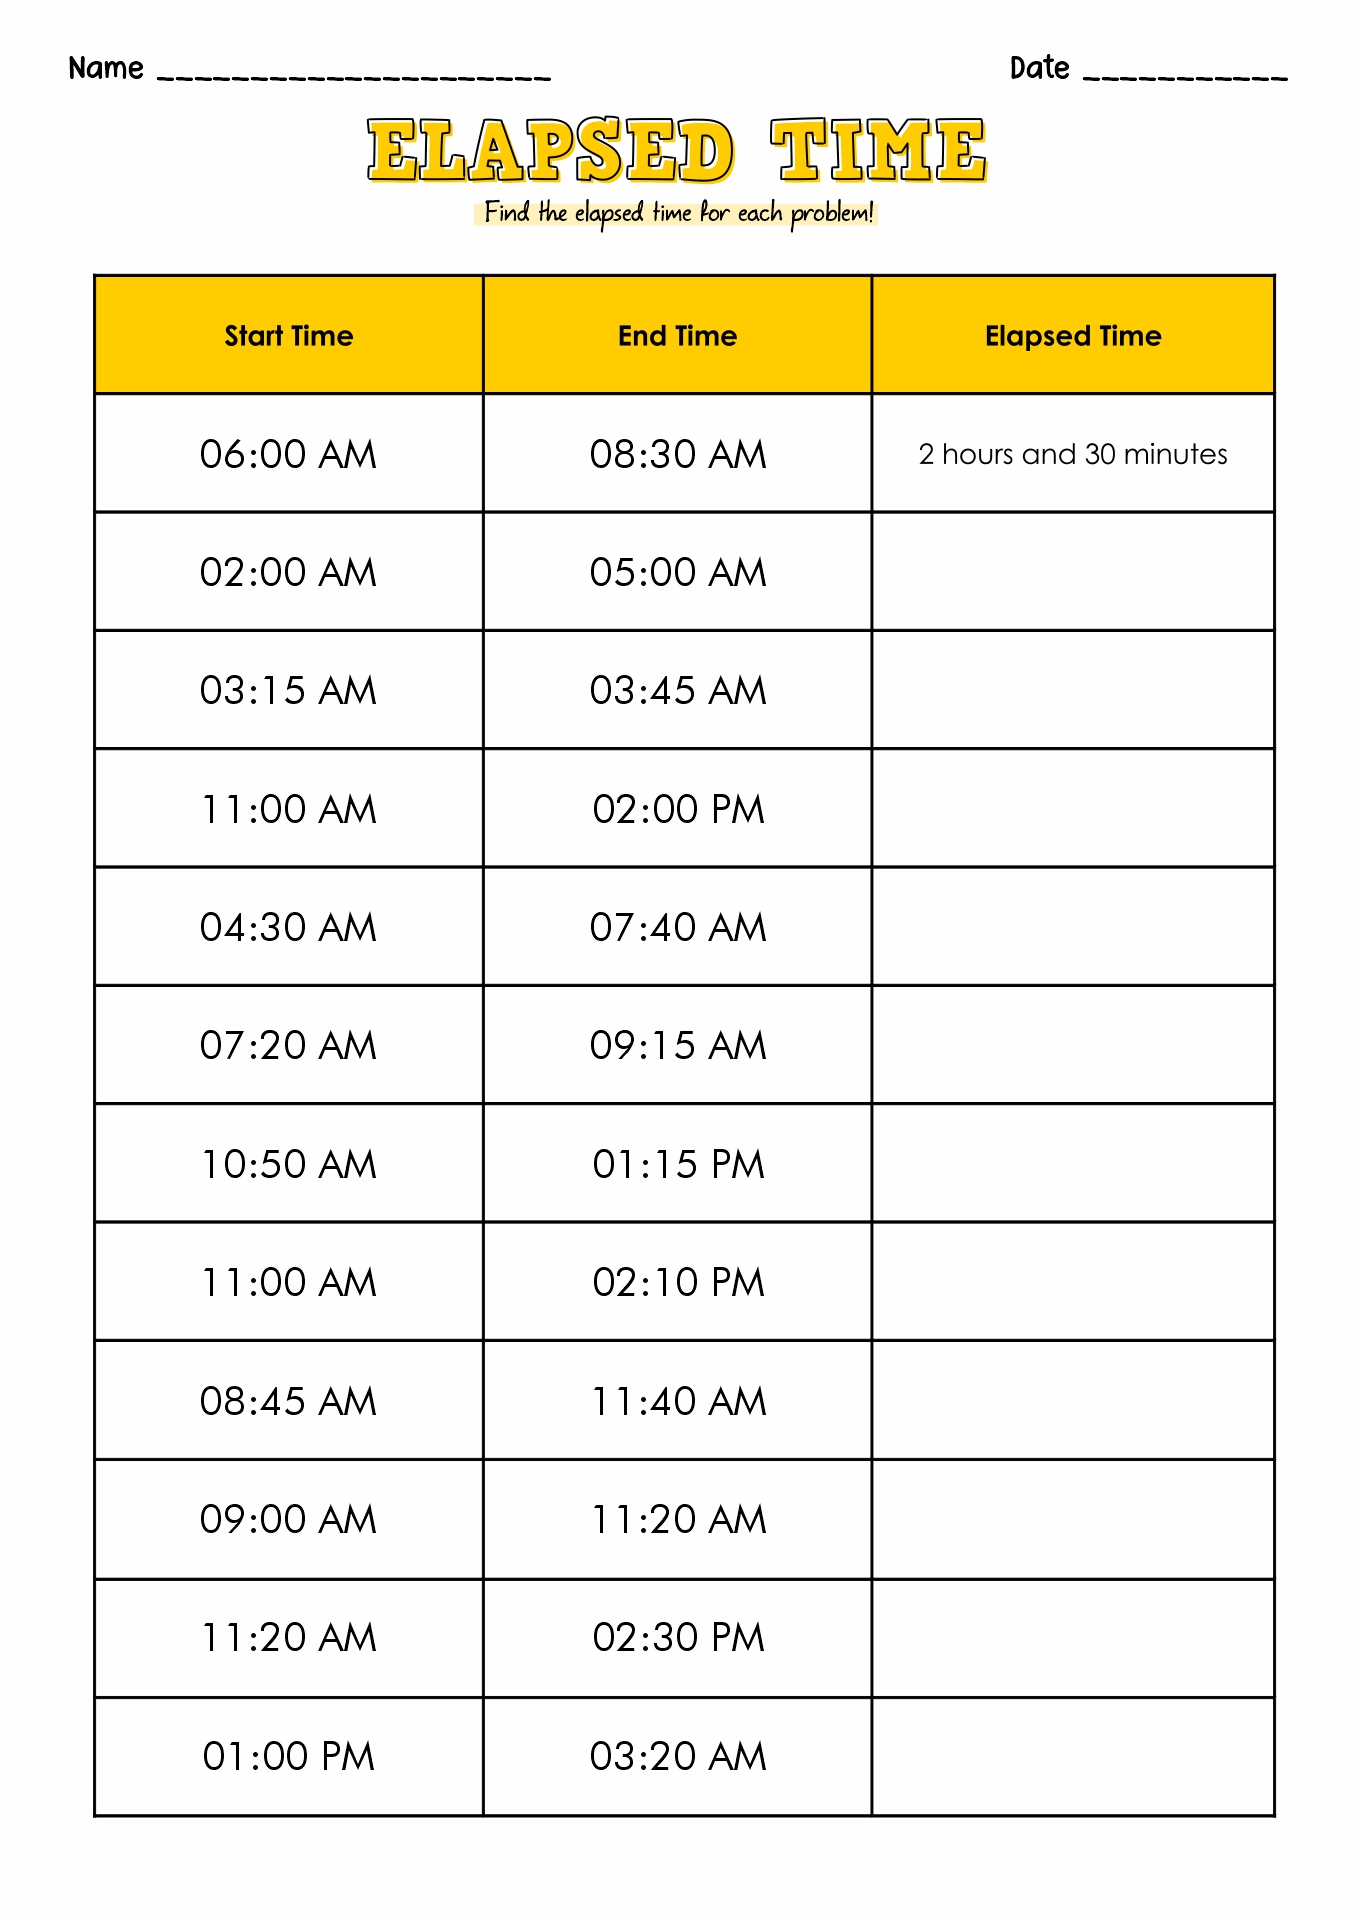 Table Elapsed Time Worksheets Image